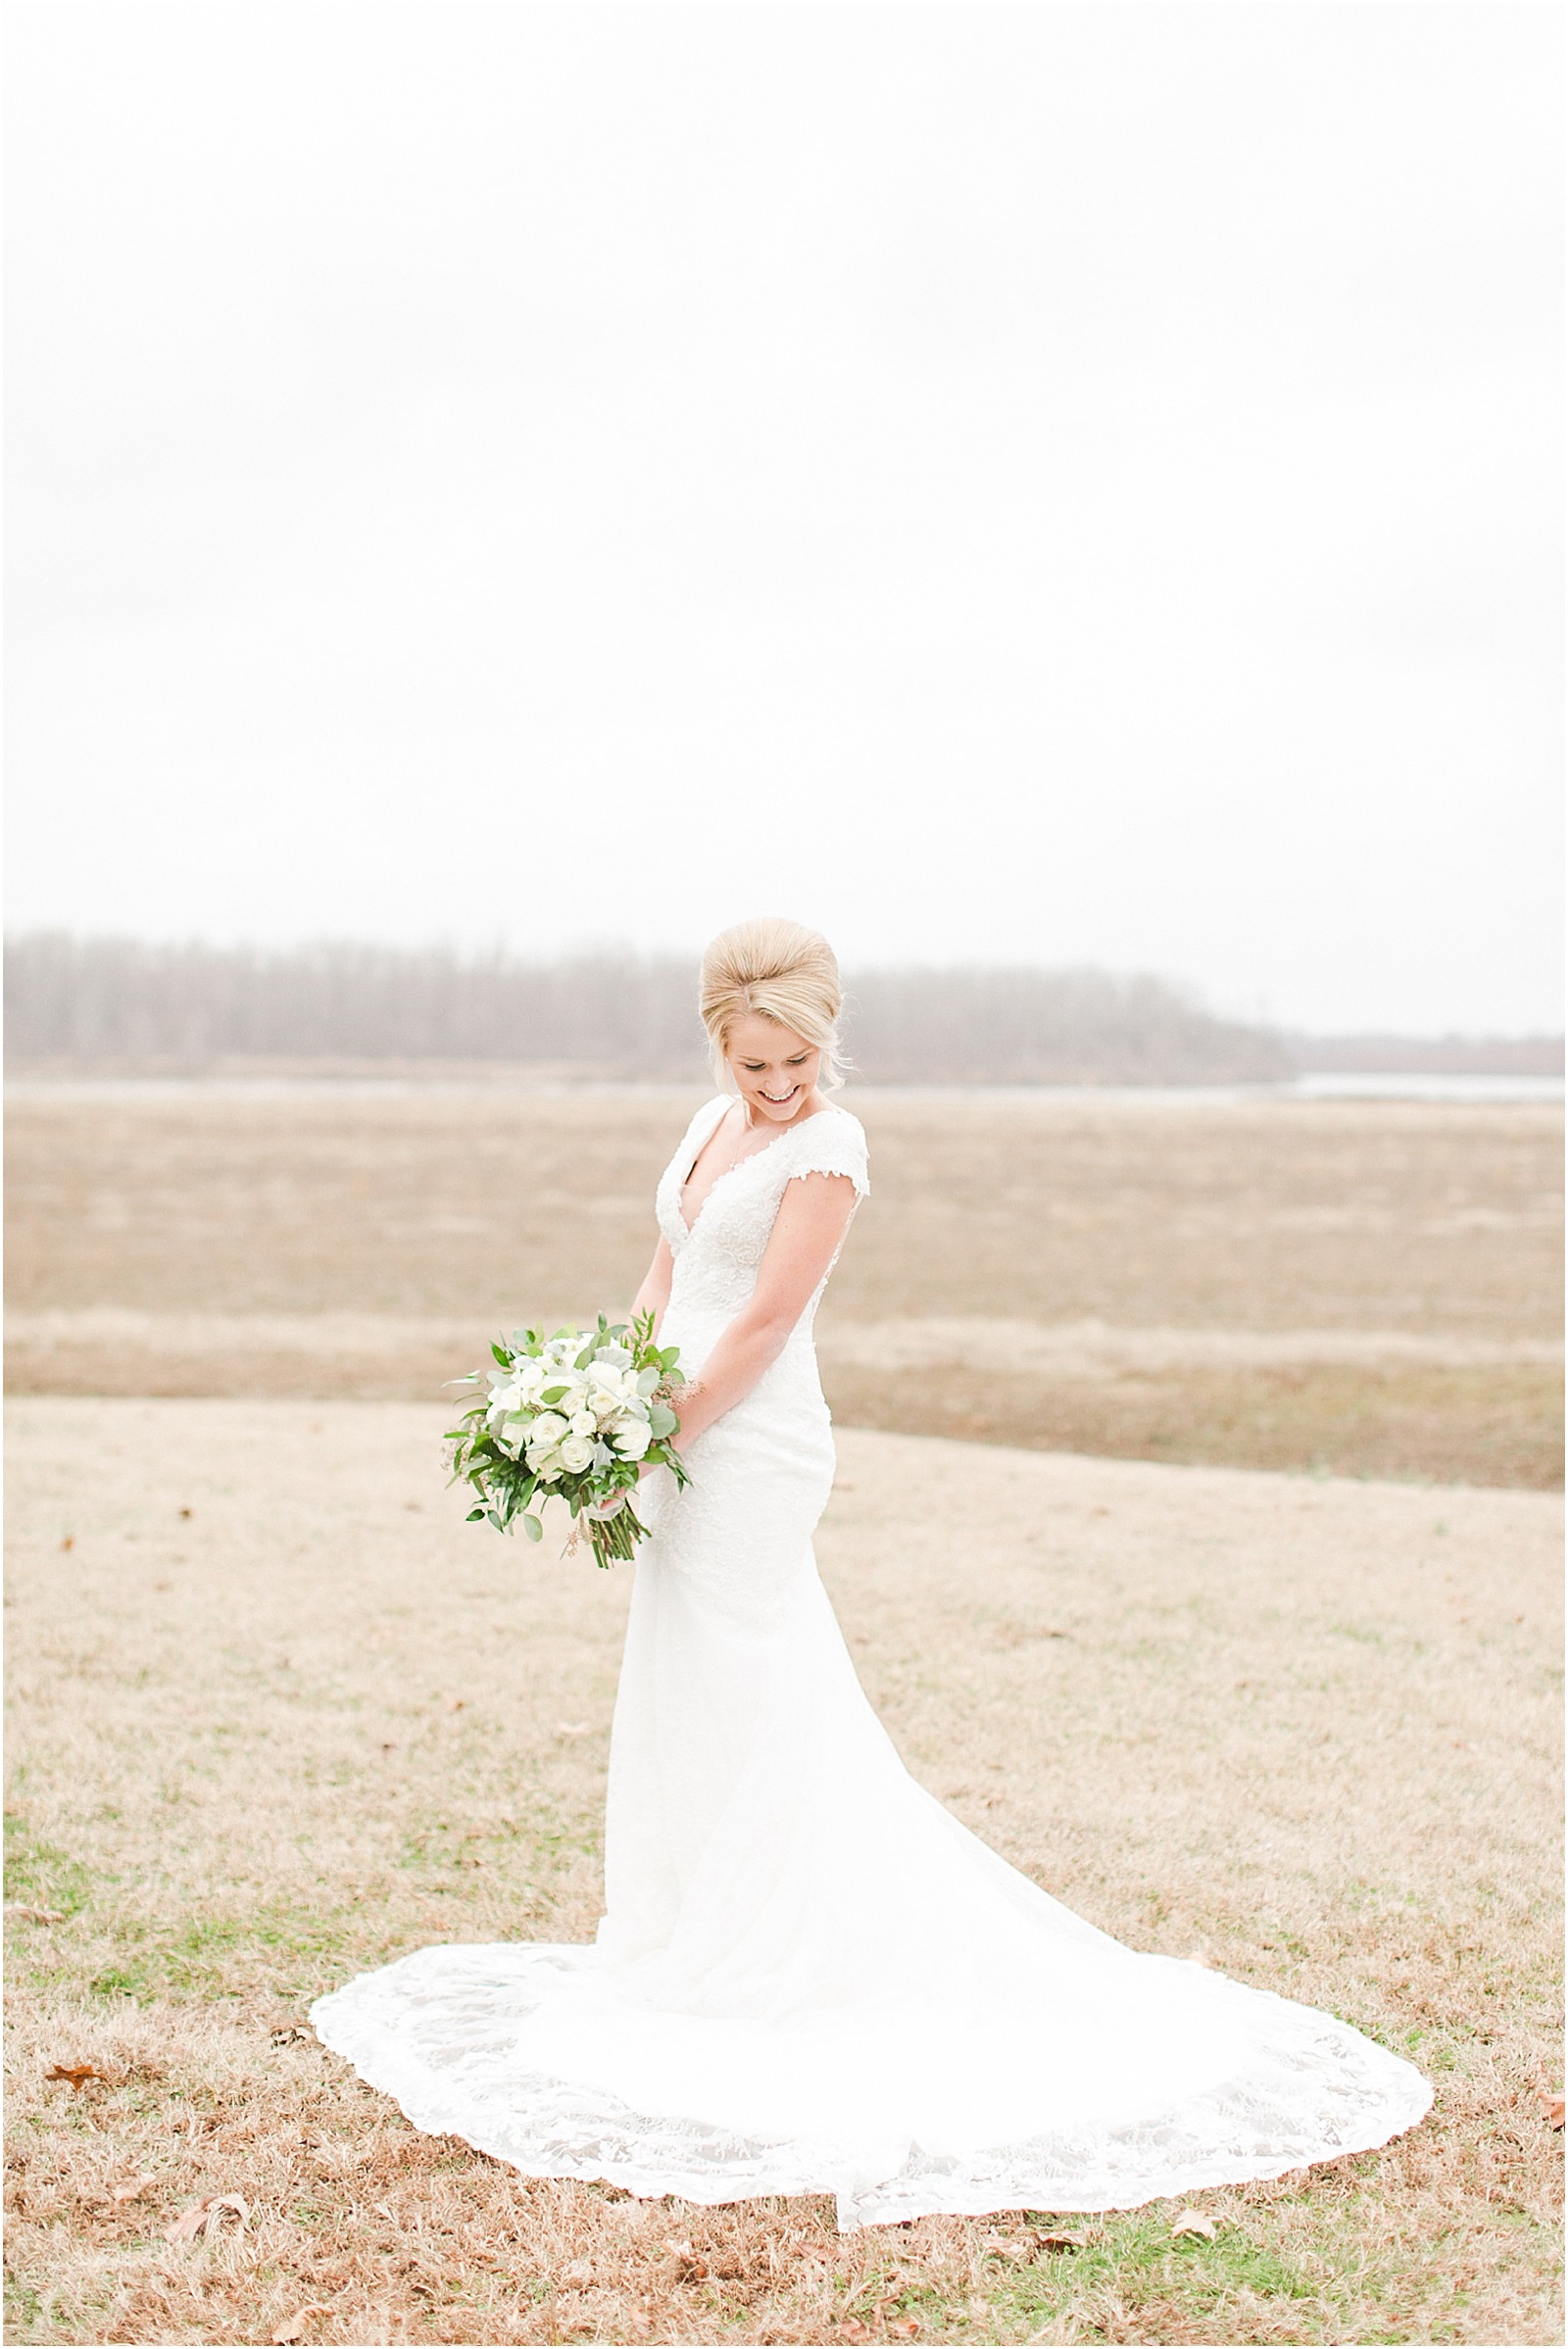 A Classic Winter Wedding in New Harmony | Rachel and Ryan | Bret and Brandie Photography 0086.jpg